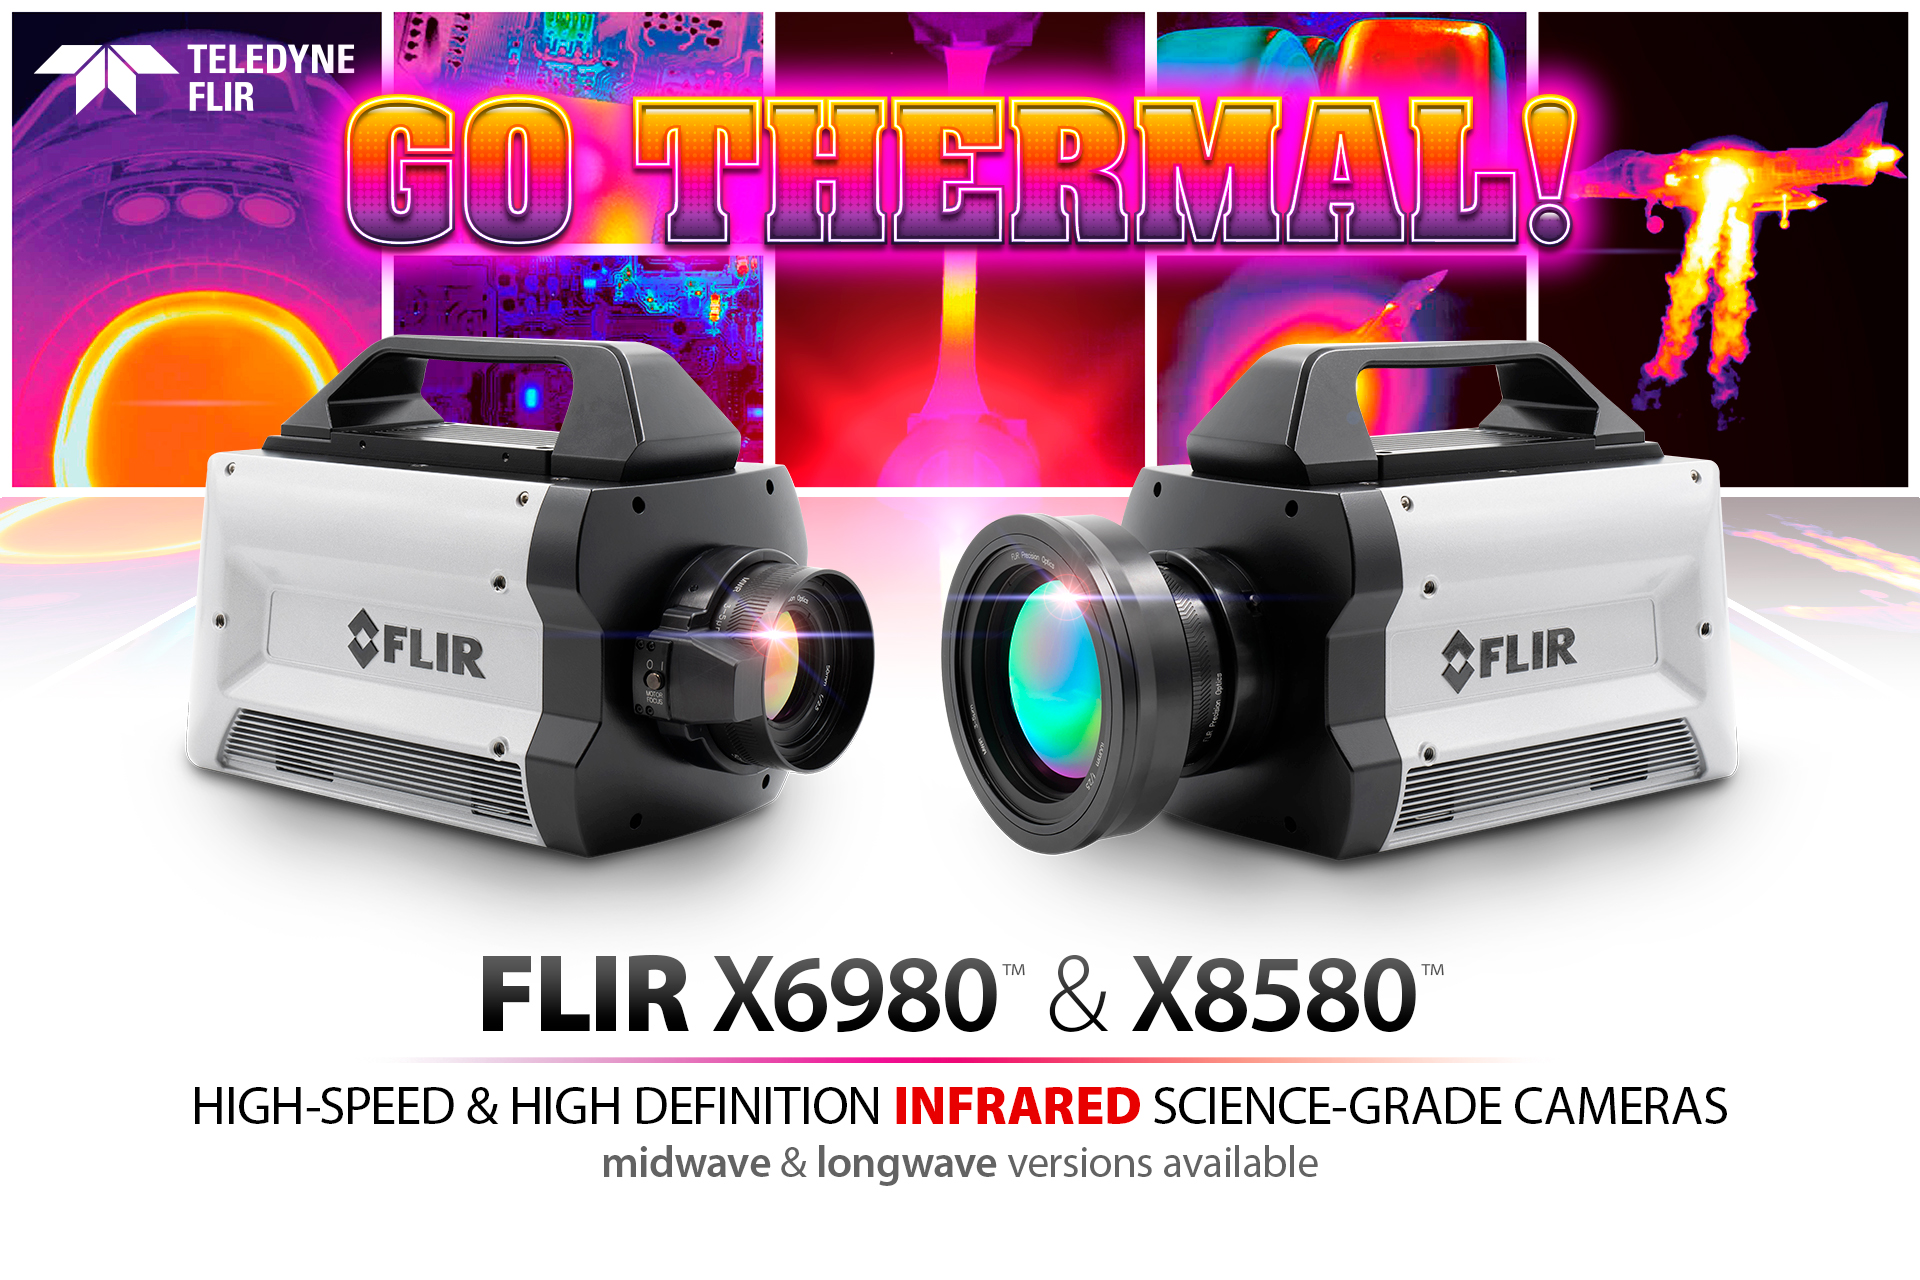 Go Thermal! FLIR X6980™ and X8580™. High-speed and high definition infrared science-grade cameras. Midwave and longwave versions available.